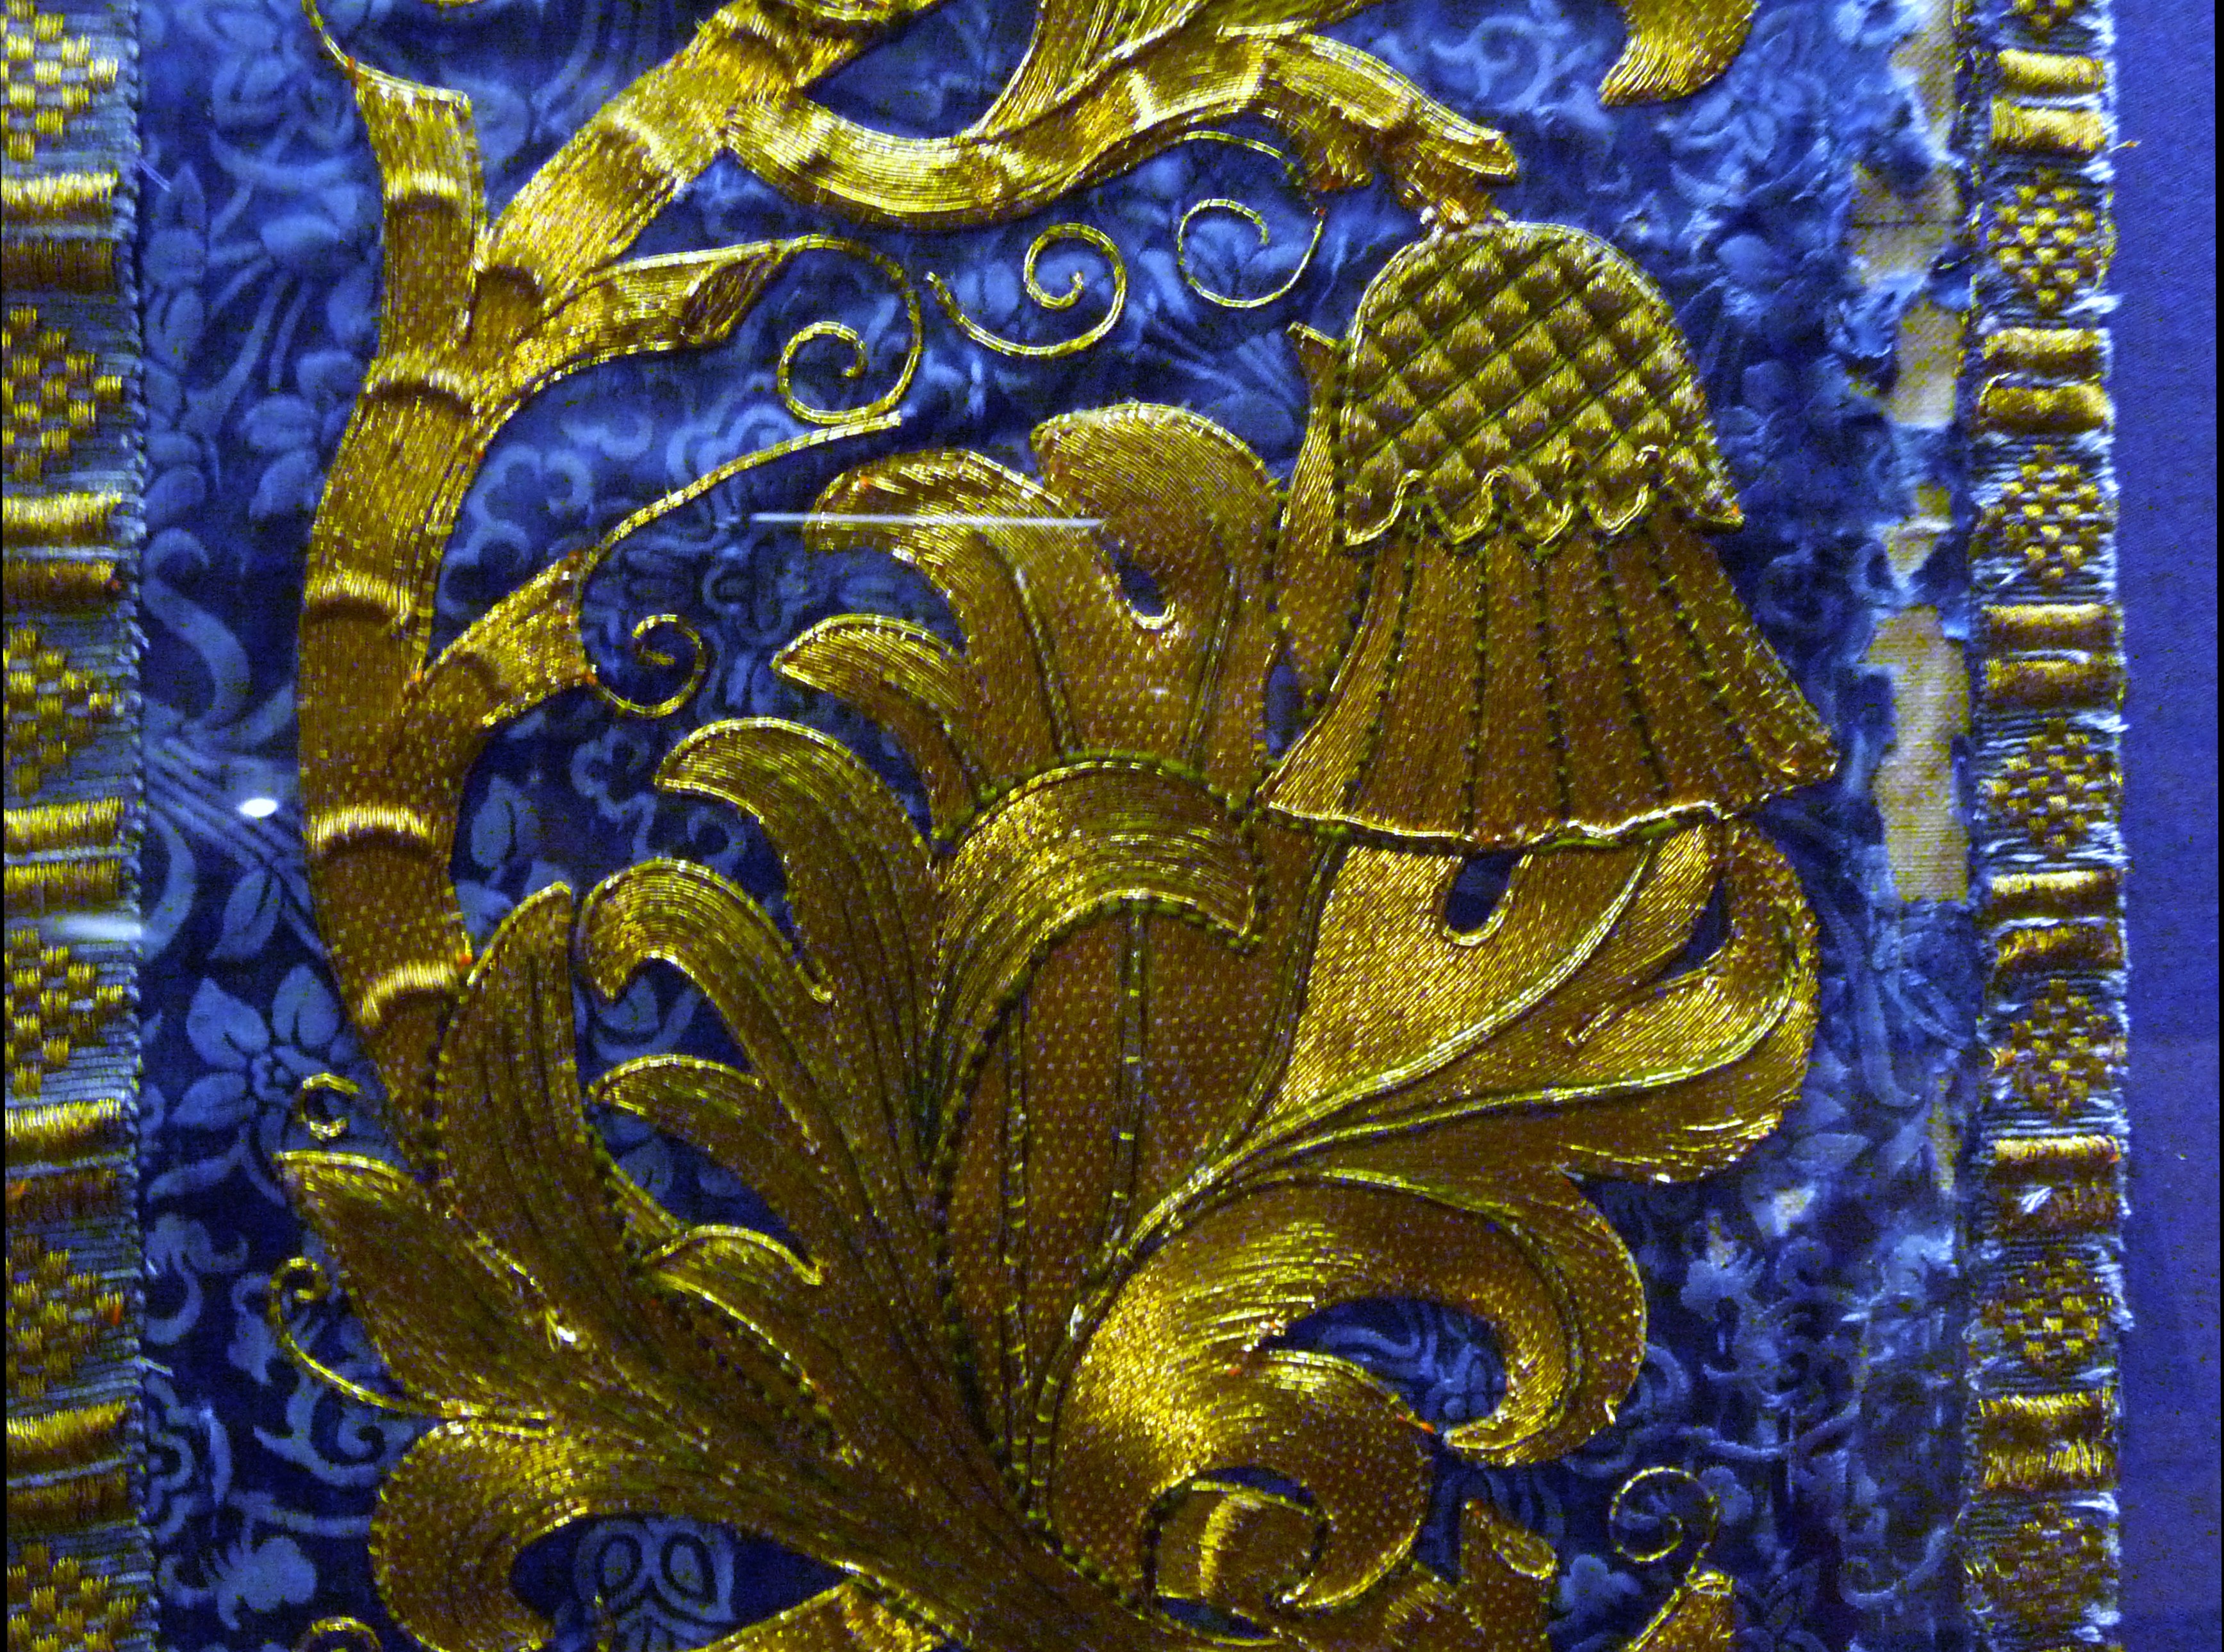 detail of Frontal for the Lady Chapel of Liverpool Cathedral worked by Margaret and Maria Comber between 1906 and 1909. They were members of the Liverpool Cathedral Embroidery Association.